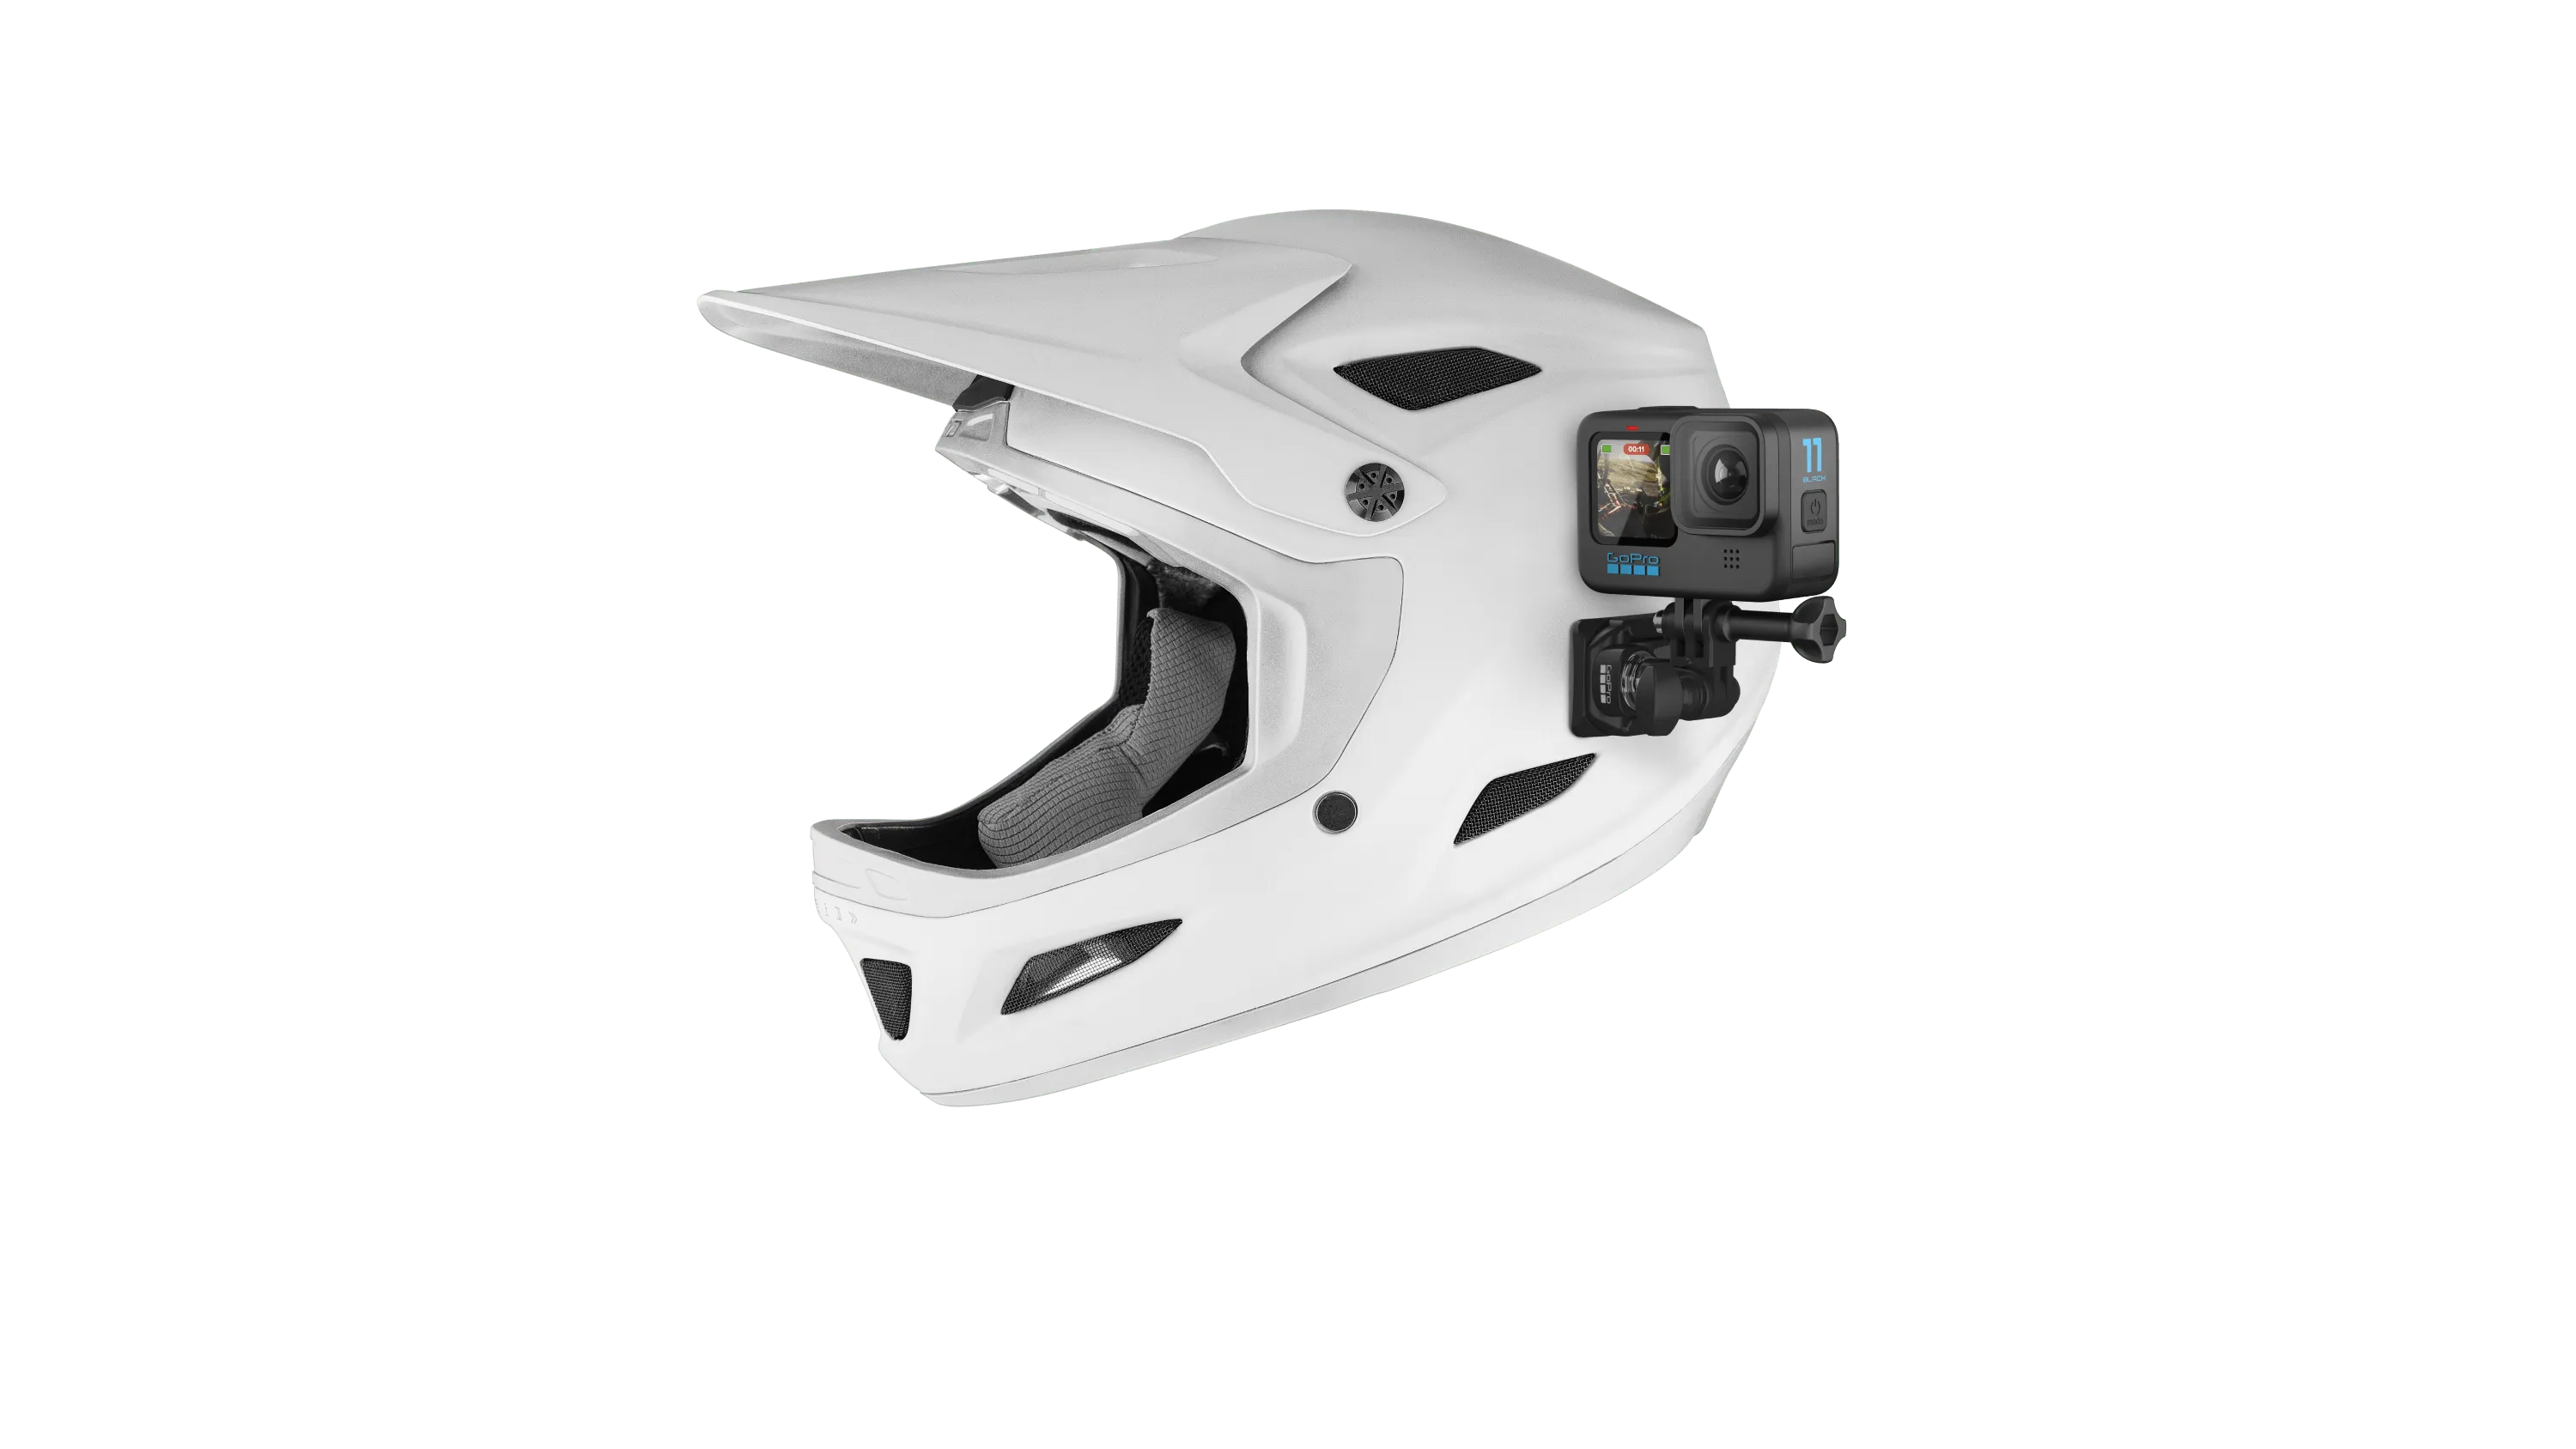 Action camera mount system for helmets, showing front and side views